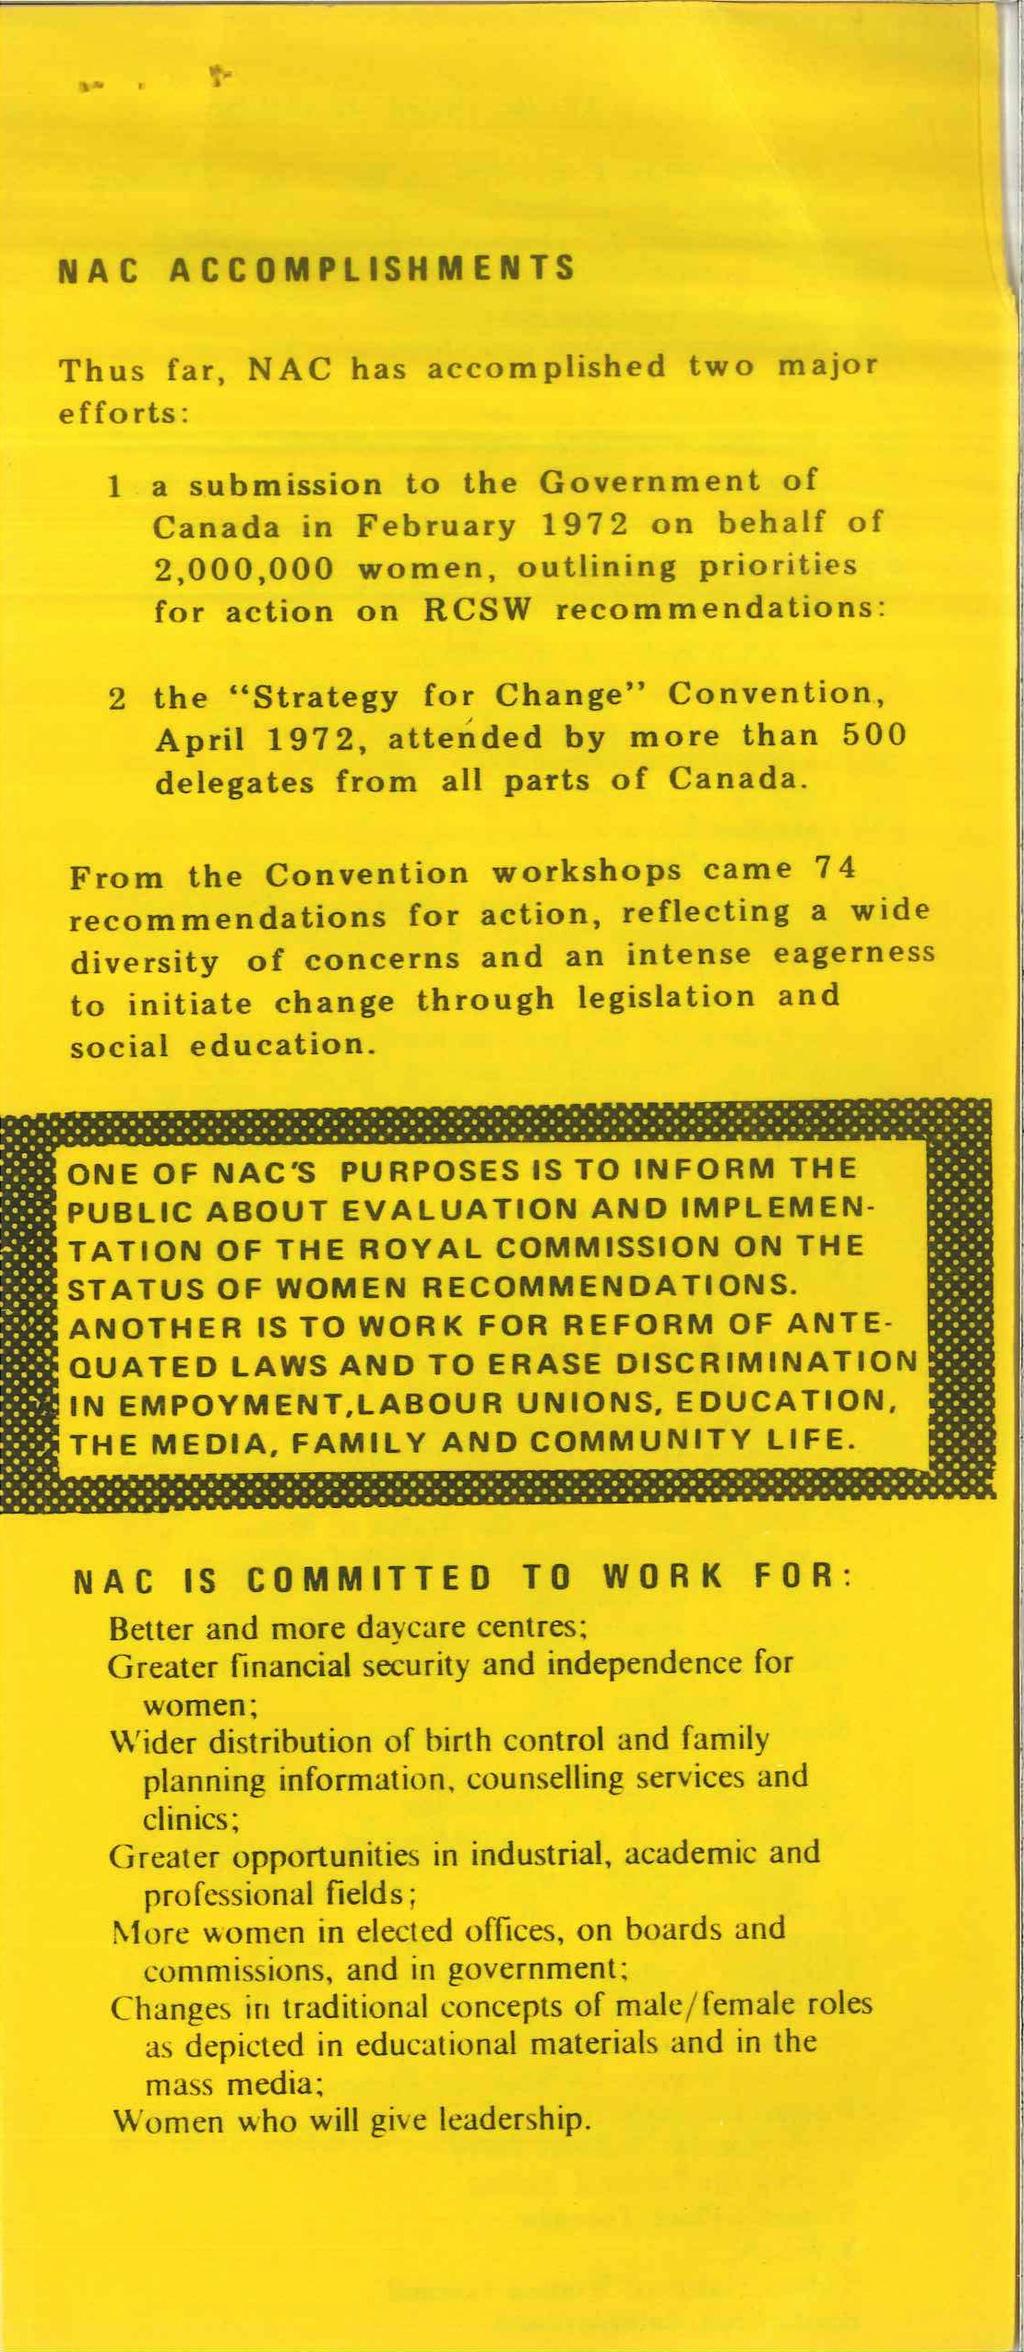 NAC ACCOMPLISHMENTS Thus far, NAC has accomplished two major efforts : 1 a submission to the Government of Canada in February 1972 on behalf of 2,000,000 women, outlining priorities for action on